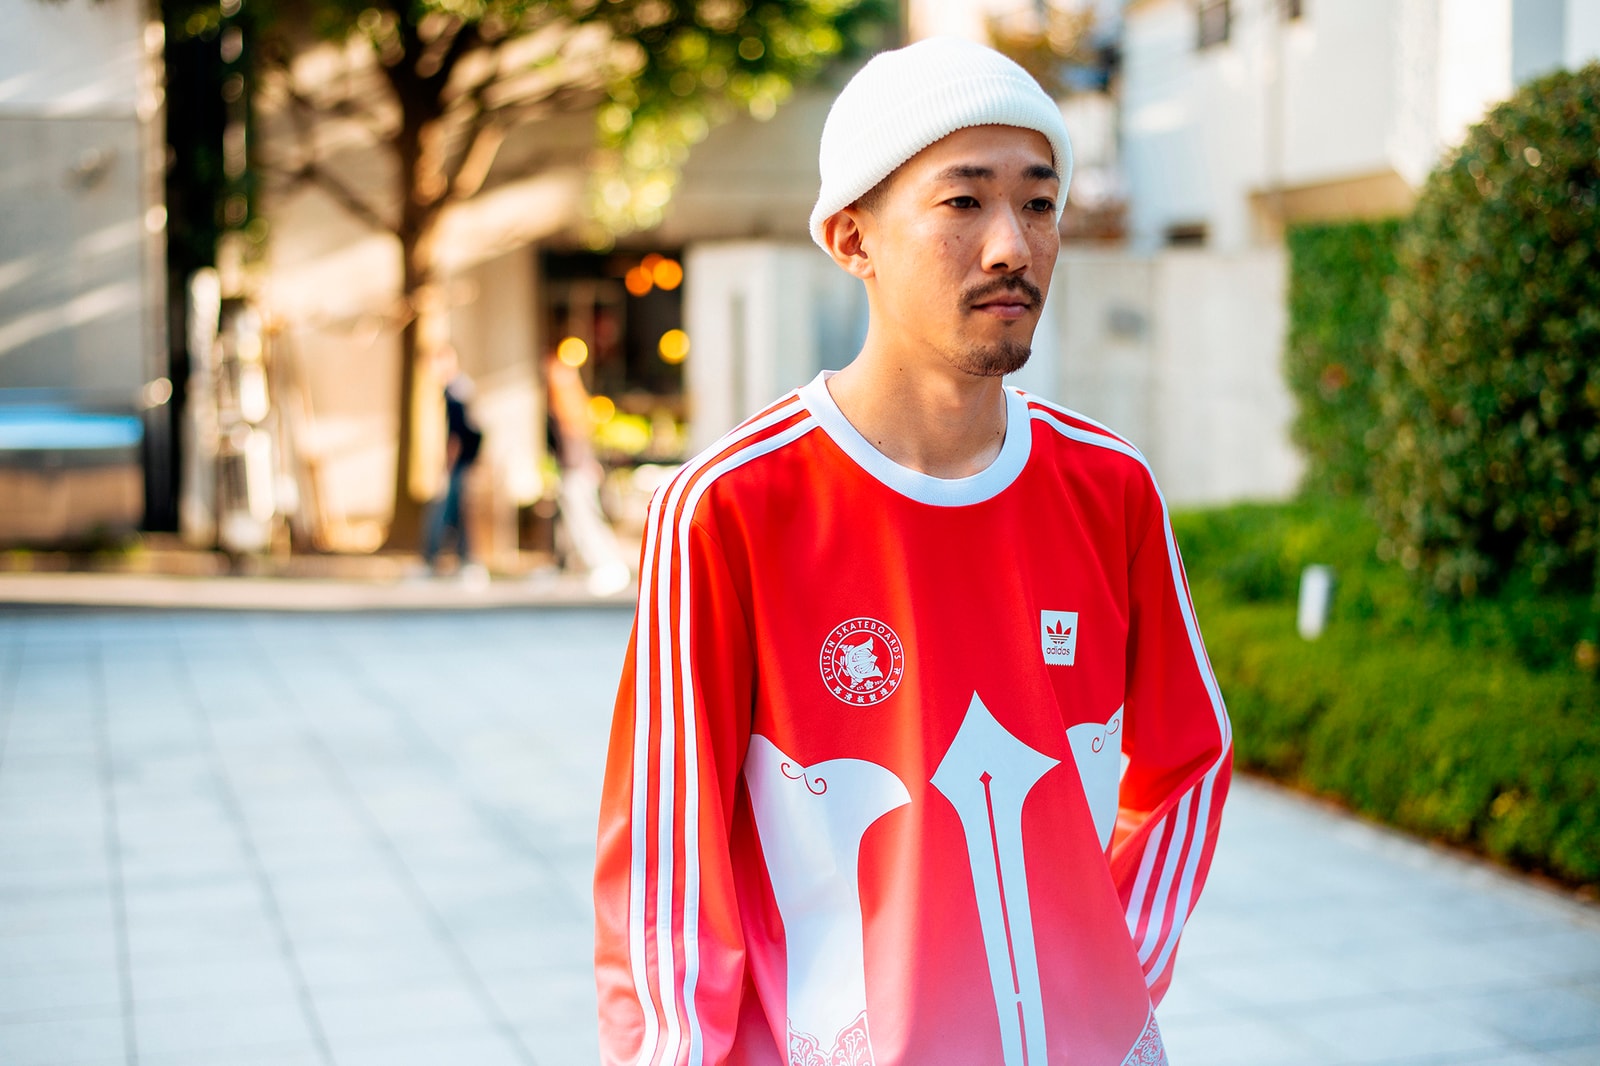 ADIDAS TEAMS UP WITH JAPAN'S EVISEN BRAND